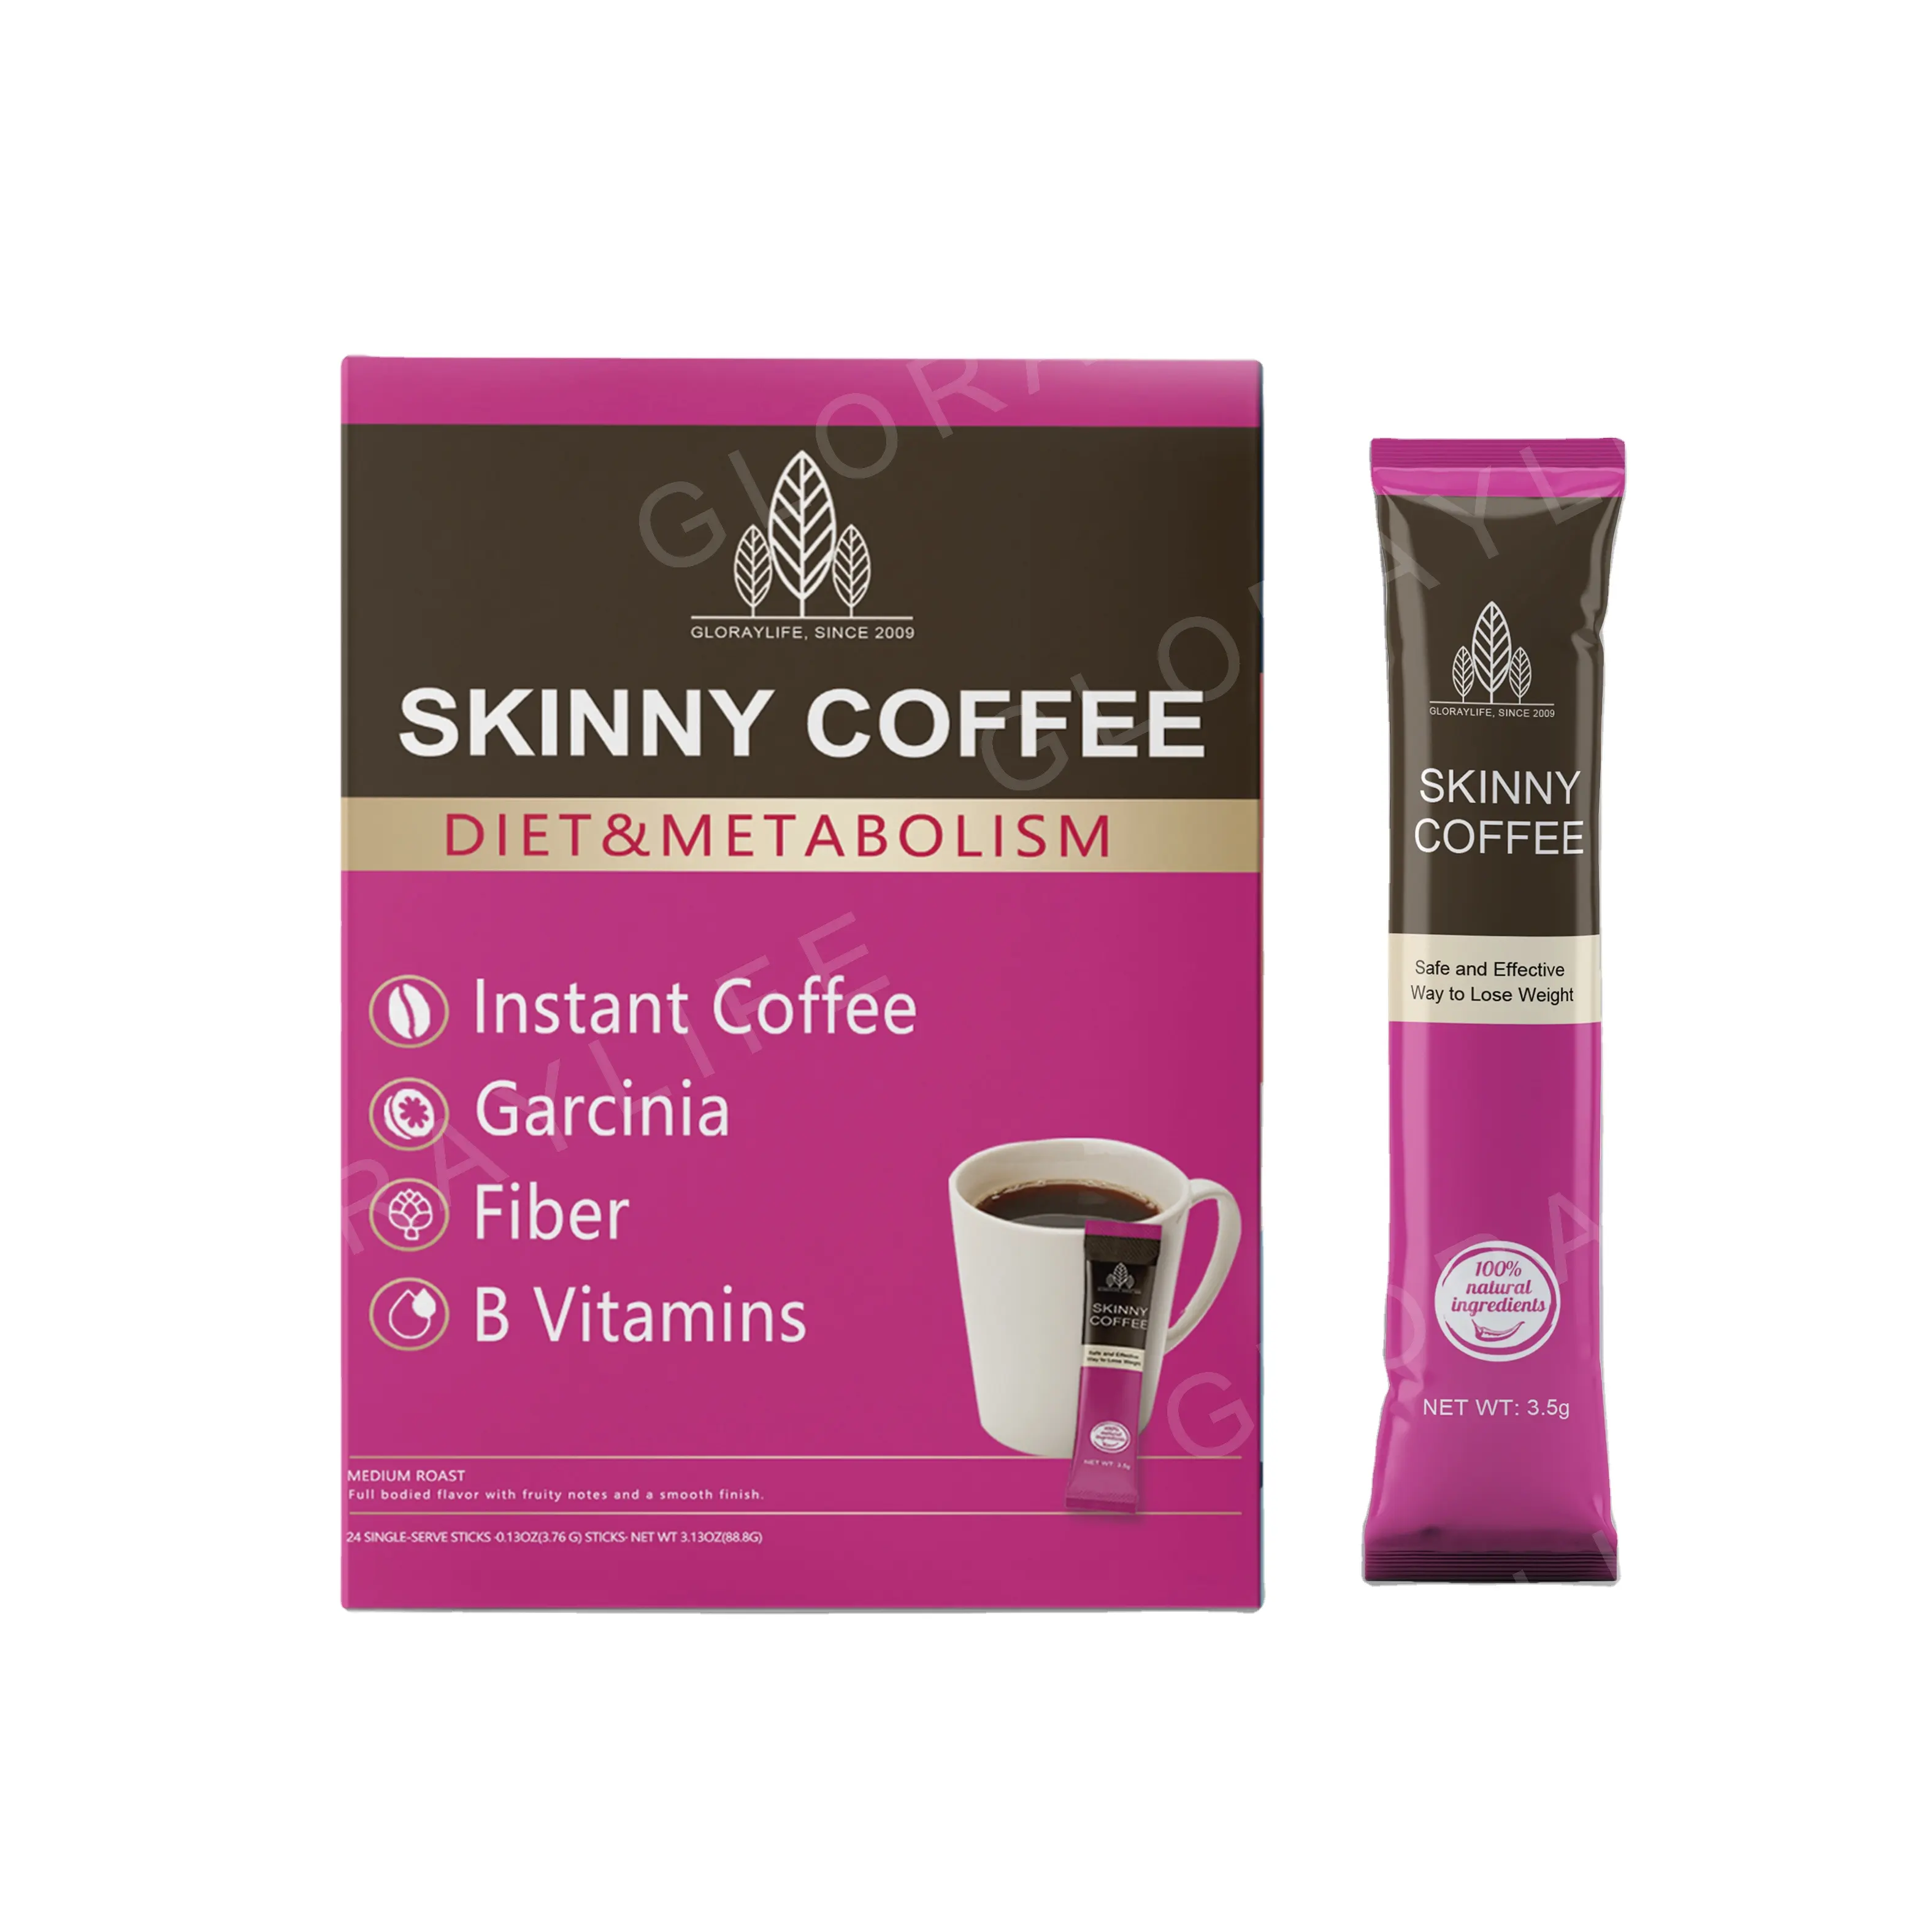 Super Skinny Coffee Powder Sachets Gluten Free Energy Boost Coffee High Quality Coffee Beans For Weight Loss Factory Supply